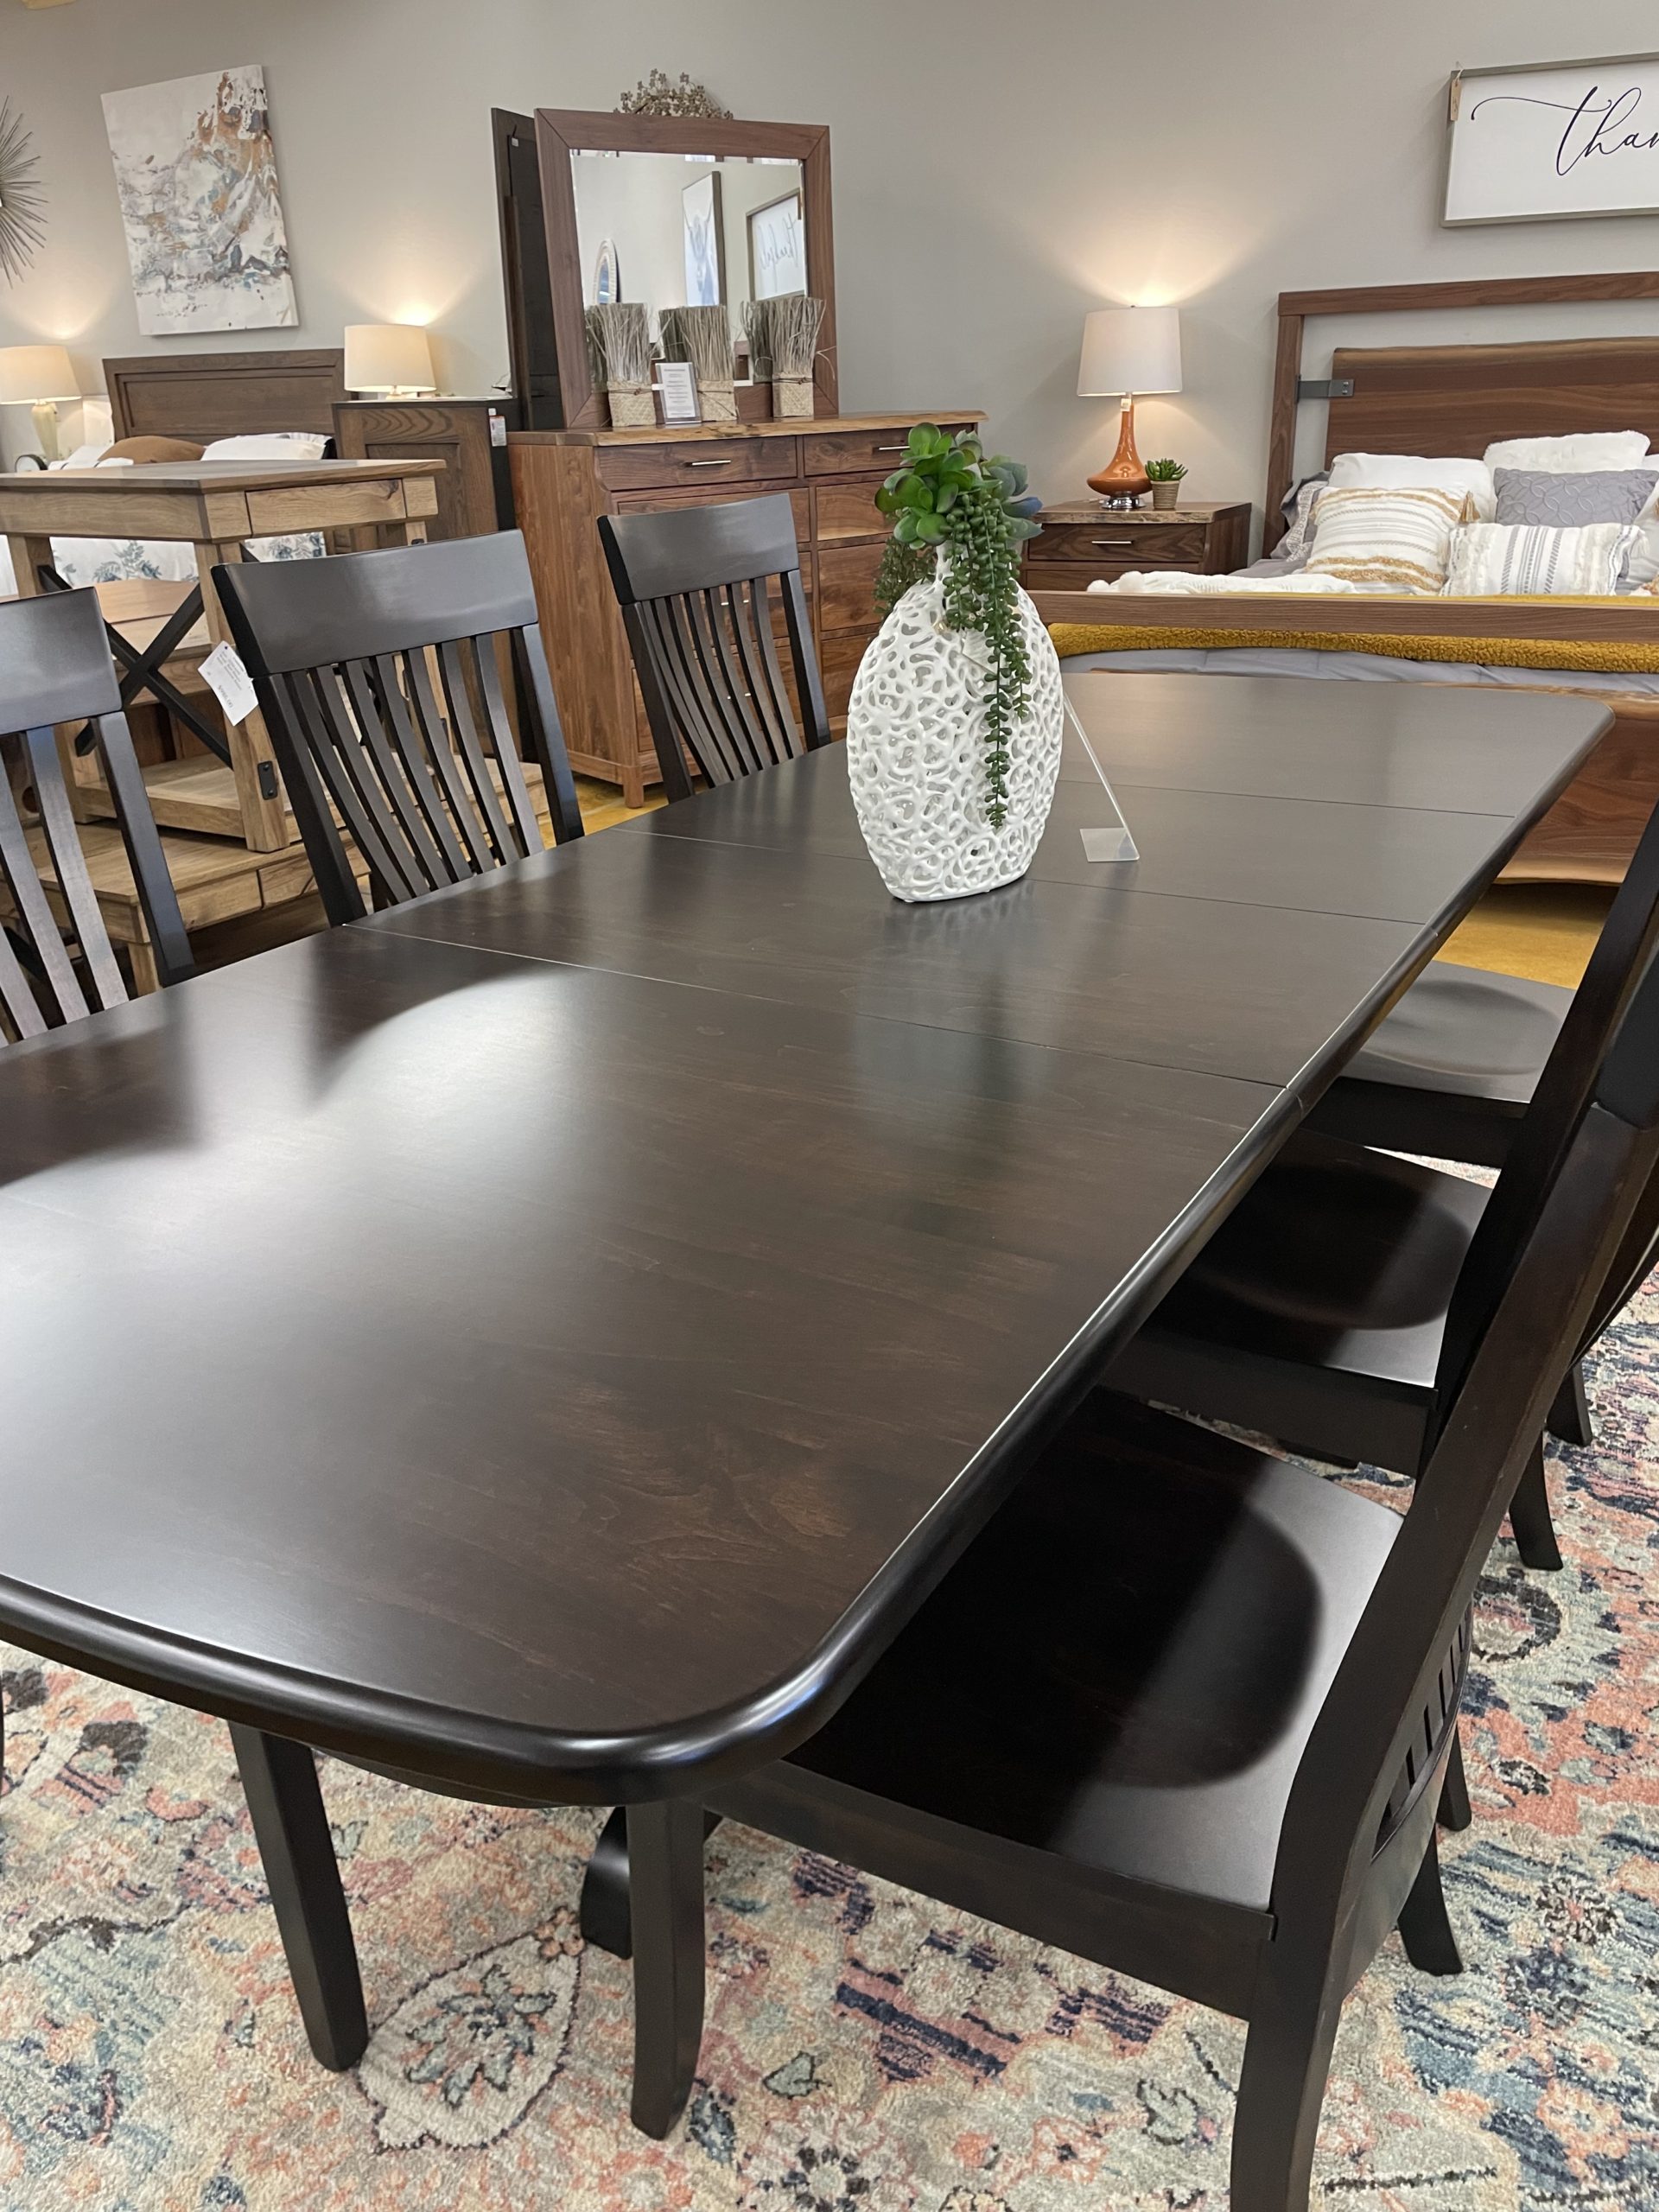 Amish Crafted Furniture dining table and chairs